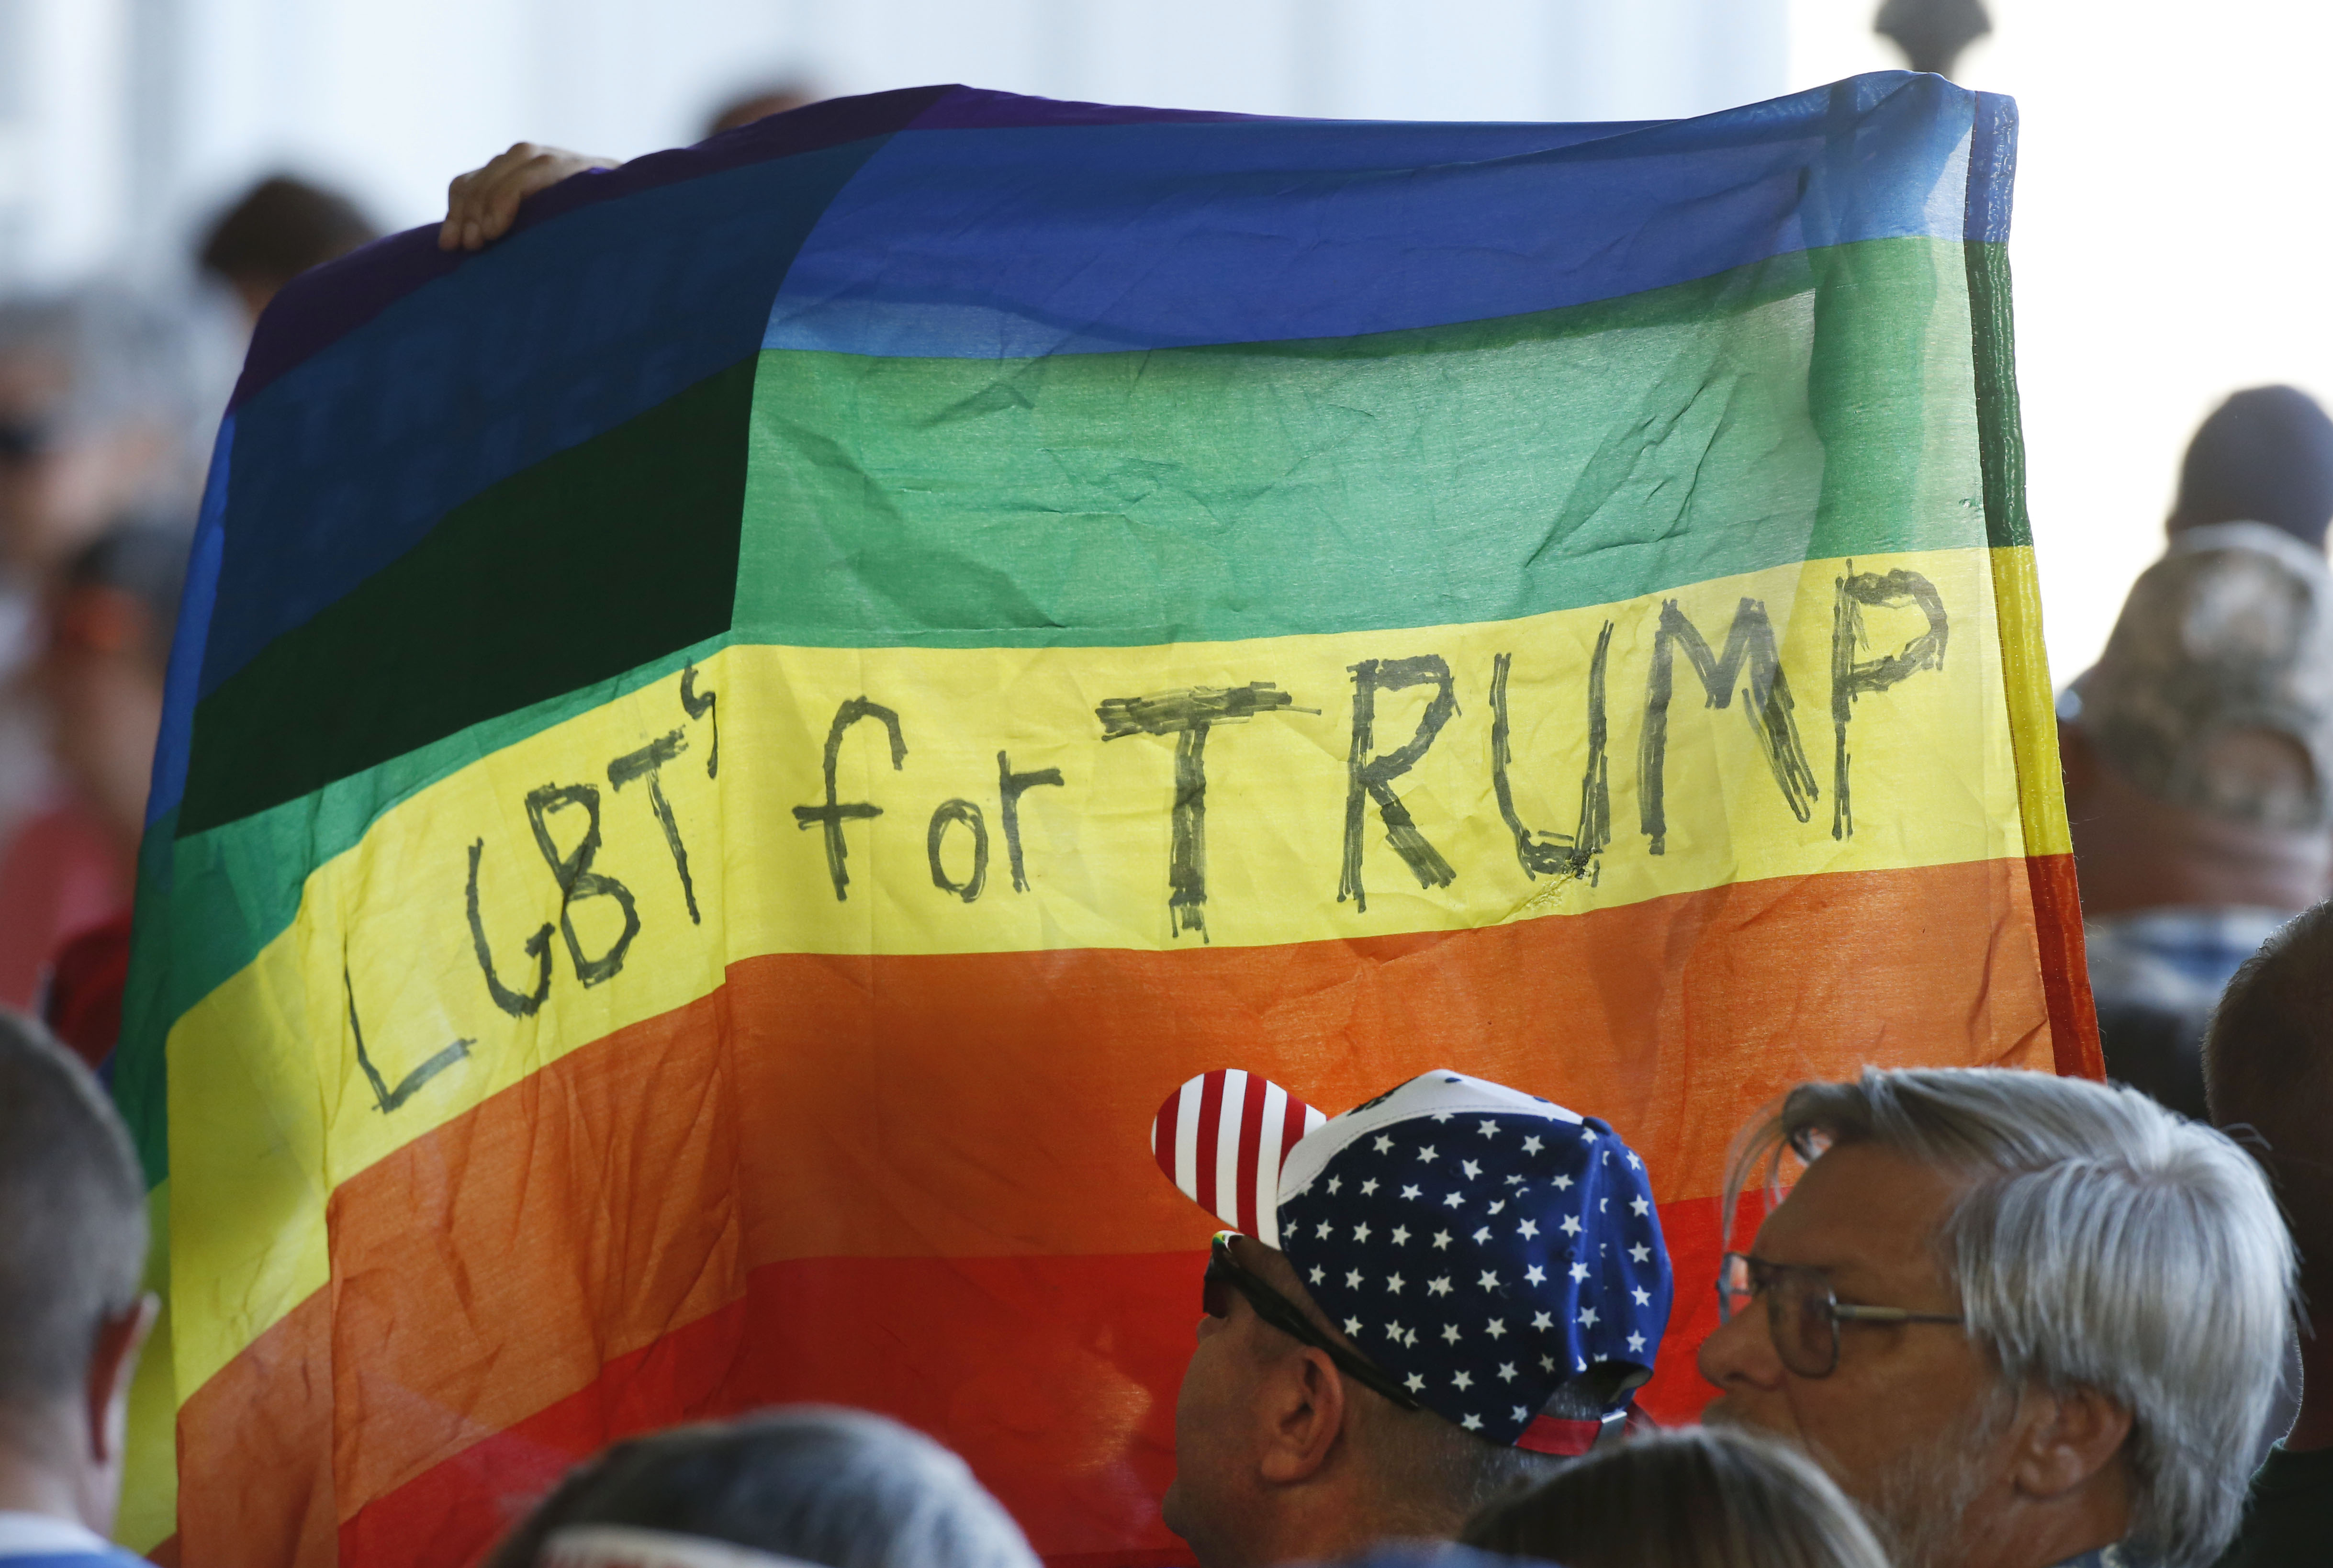 Gays for Trump